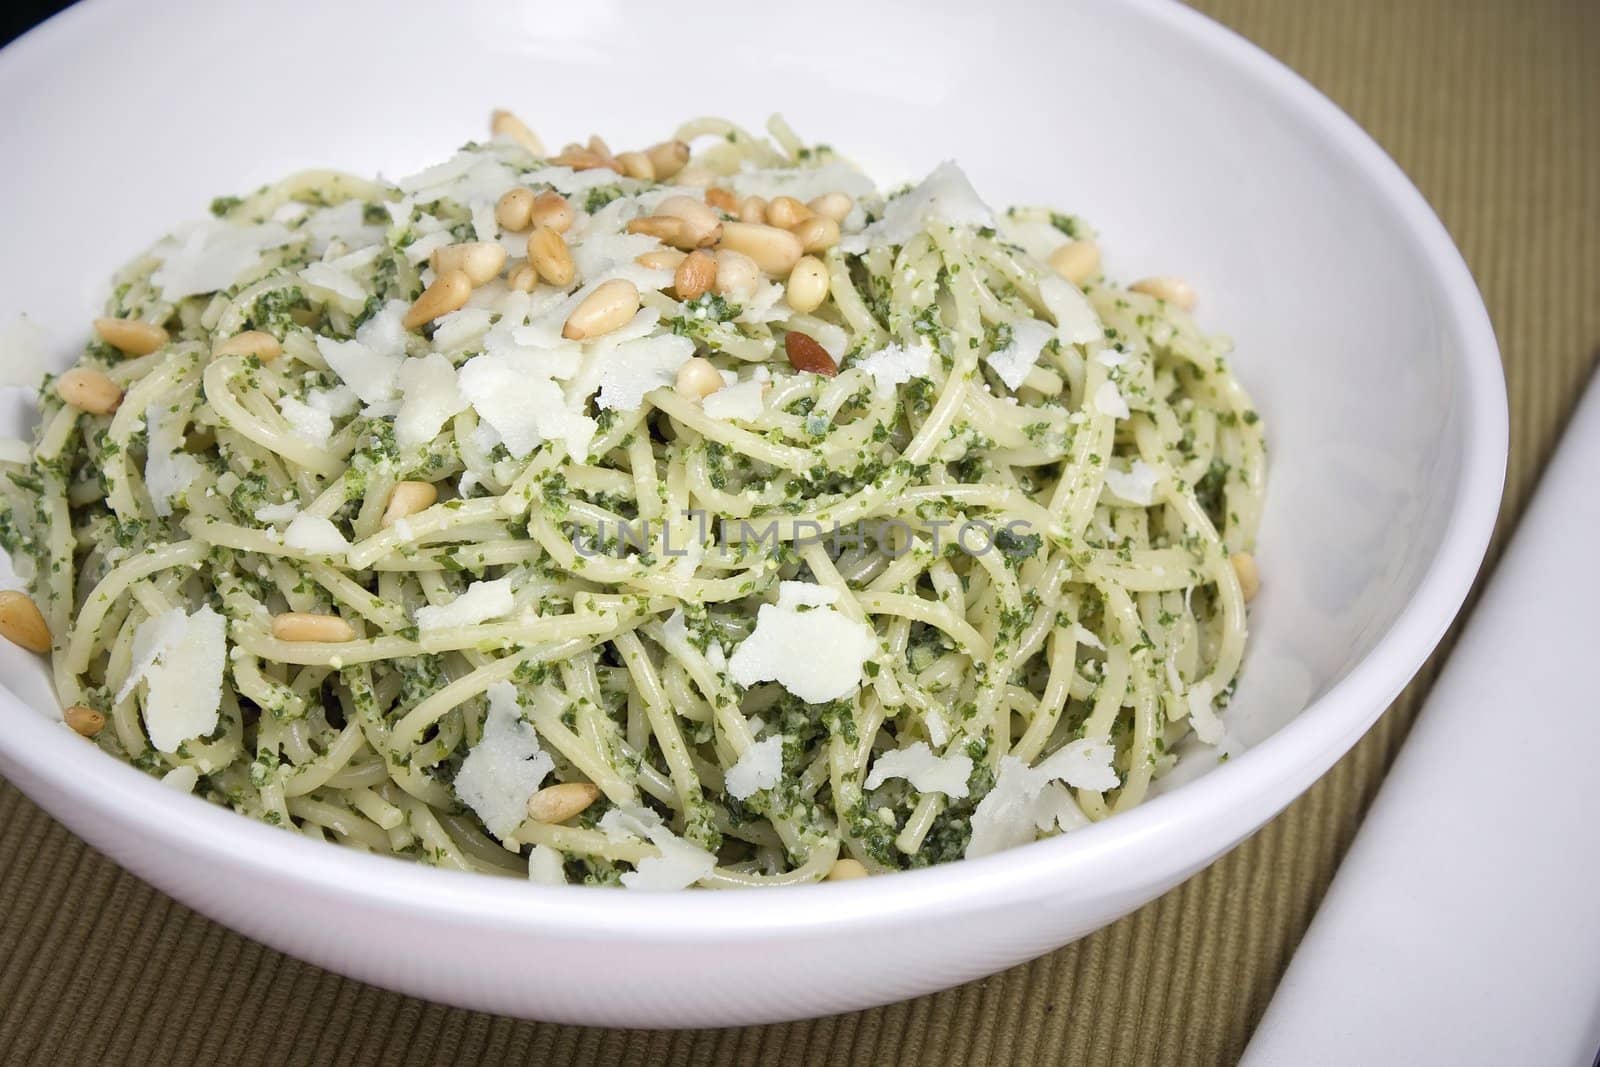 Pesto pasta in white bowl topped with Parmesan flakes and roasted pine nuts.